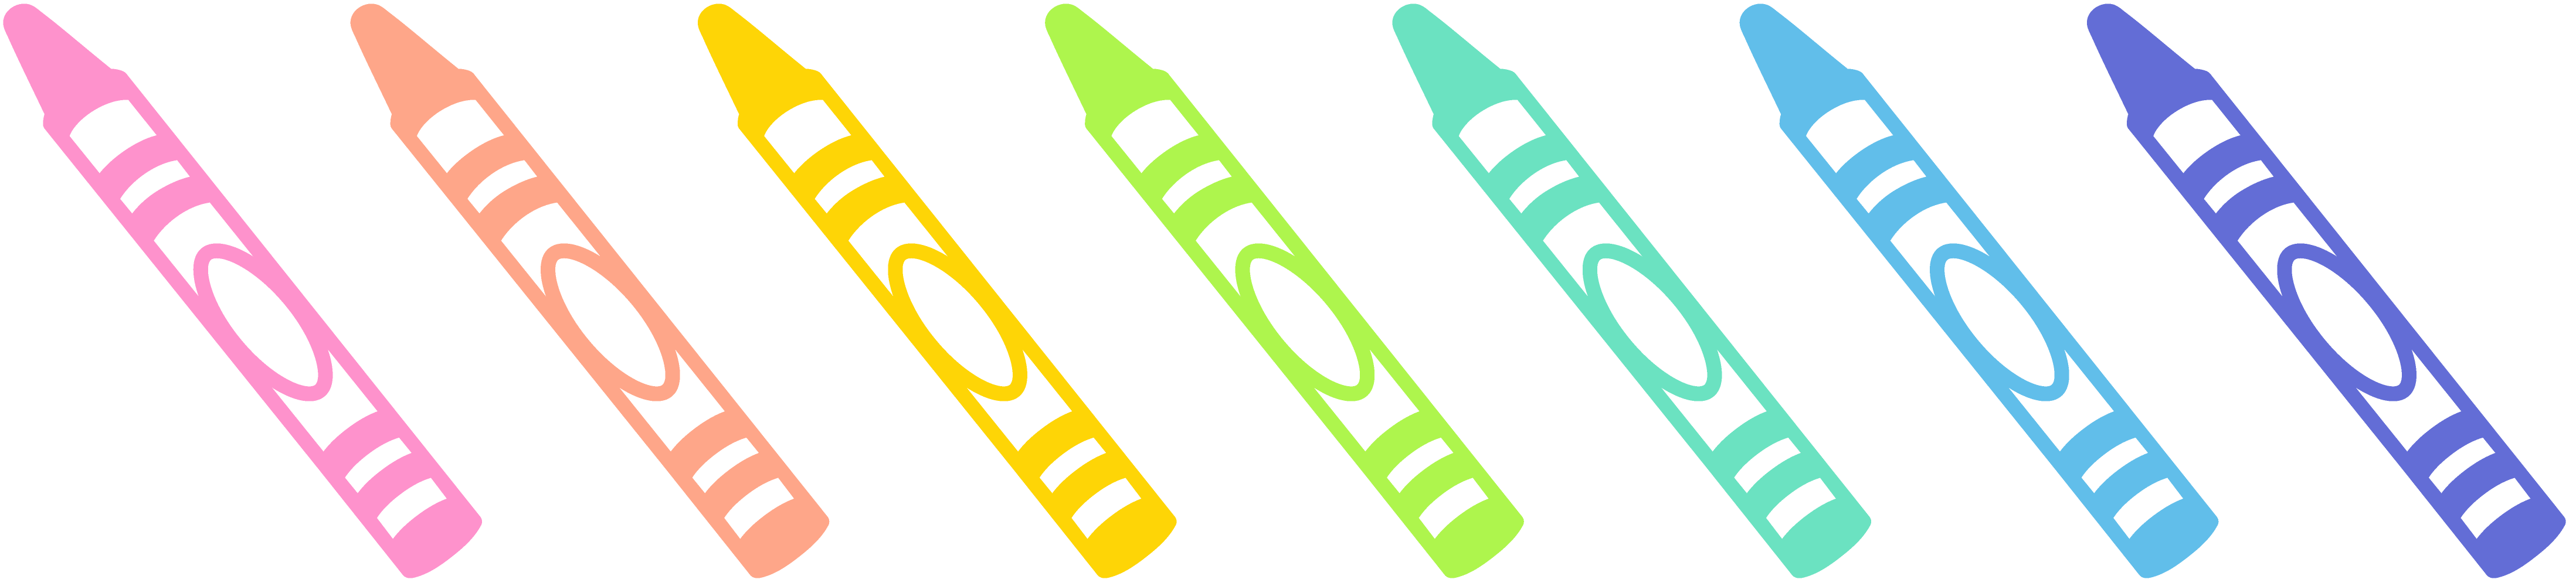 An illustration depicting 7 crayons, in the order of light pink, peach, yellow, bright green, teal, light blue, and dark purple. These colors are the same used in the 'it's not a phase' bubble letters at the top of the page. The crayons are arranged in a row and each is tilted diagonally, with the tips facing up left.